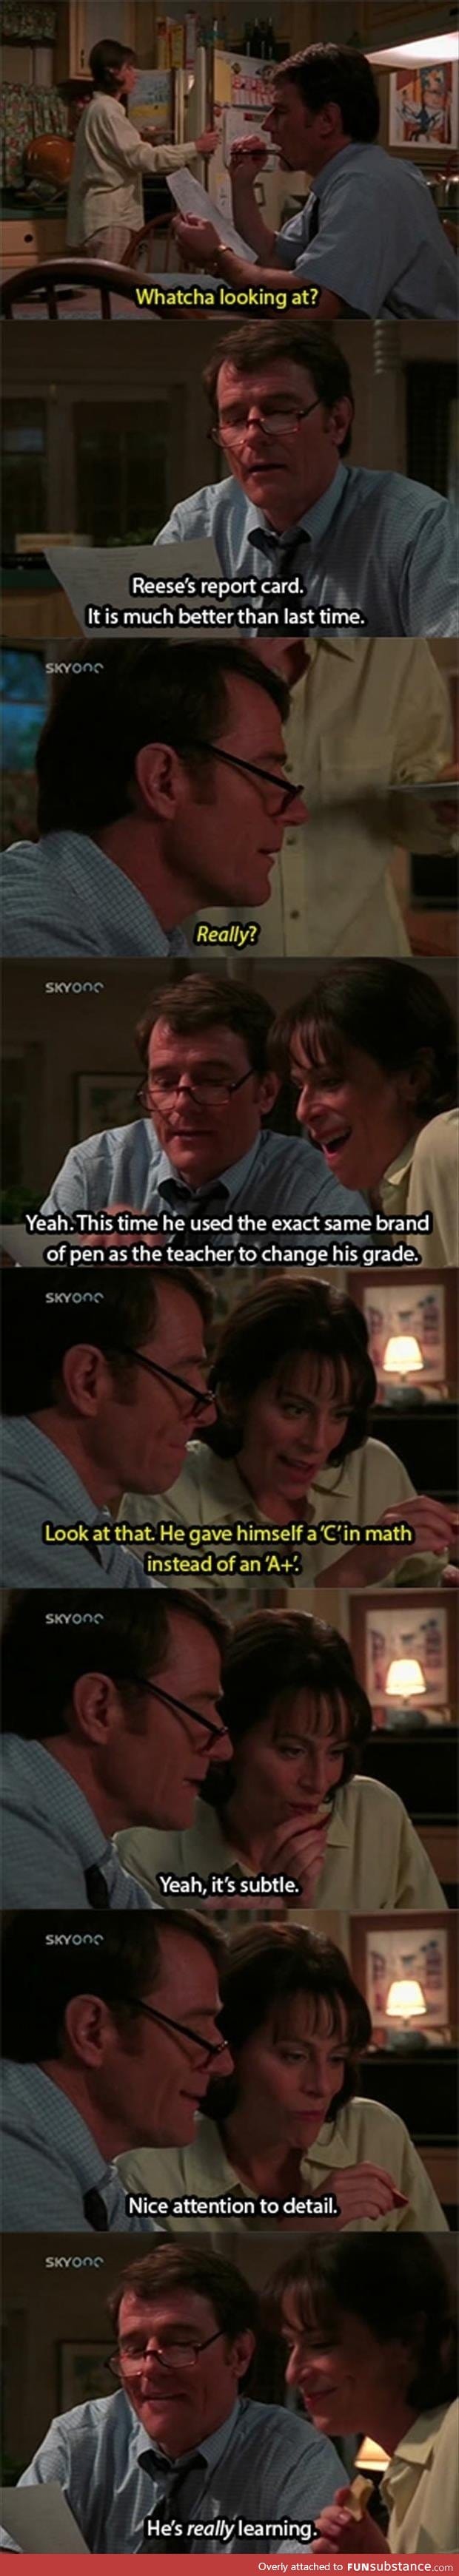 Malcolm in the Middle